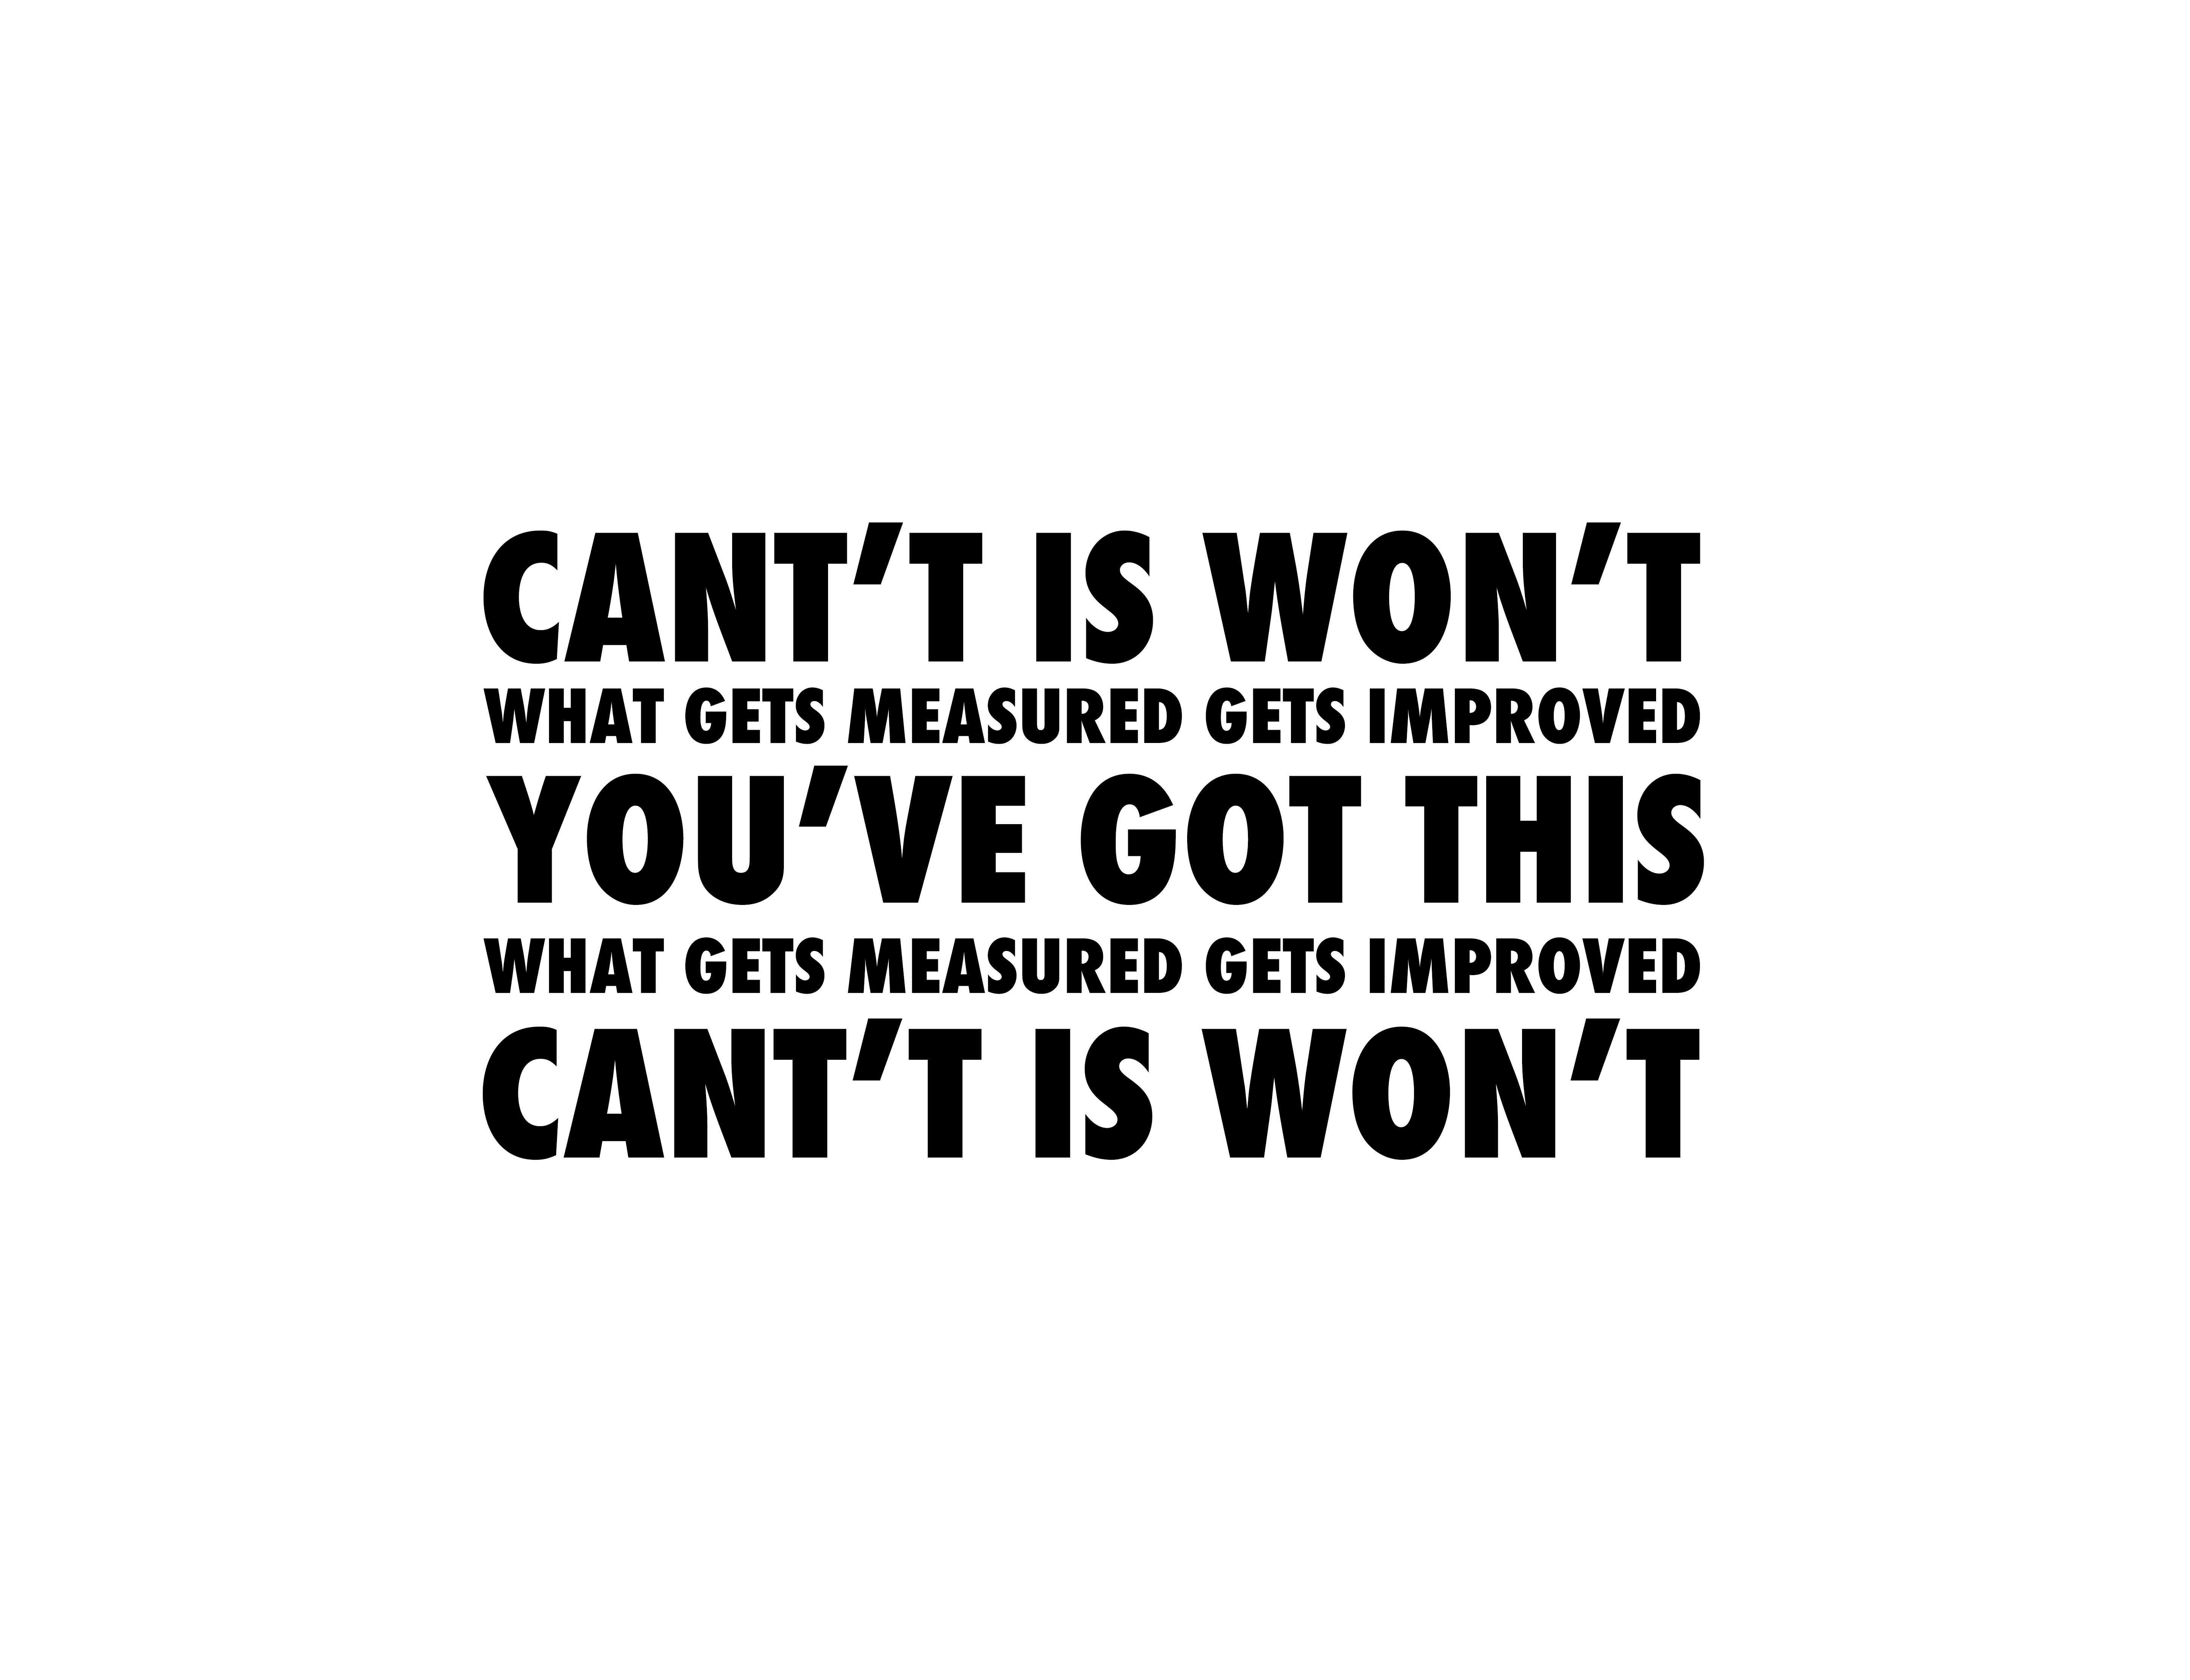 Can't Is Won't. You've Got This. What Gets Measured Gets Improved.